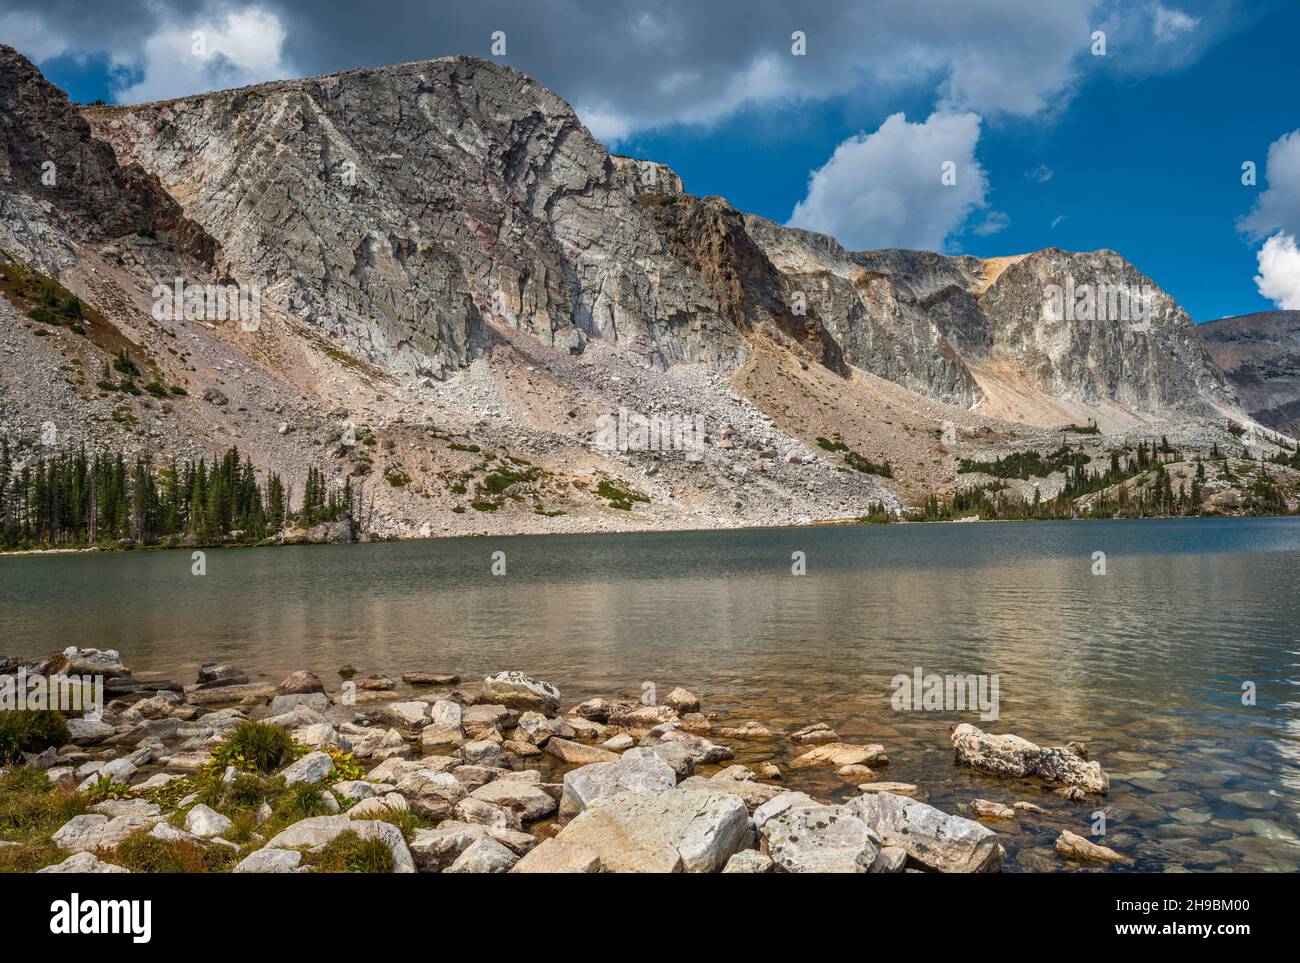 Snowy Range Quartzite Peaks, Lake Marie, Medicine Bow Mountains, Snowy Range Scenic Byway, state Highway 130, Wyoming, USA Foto Stock